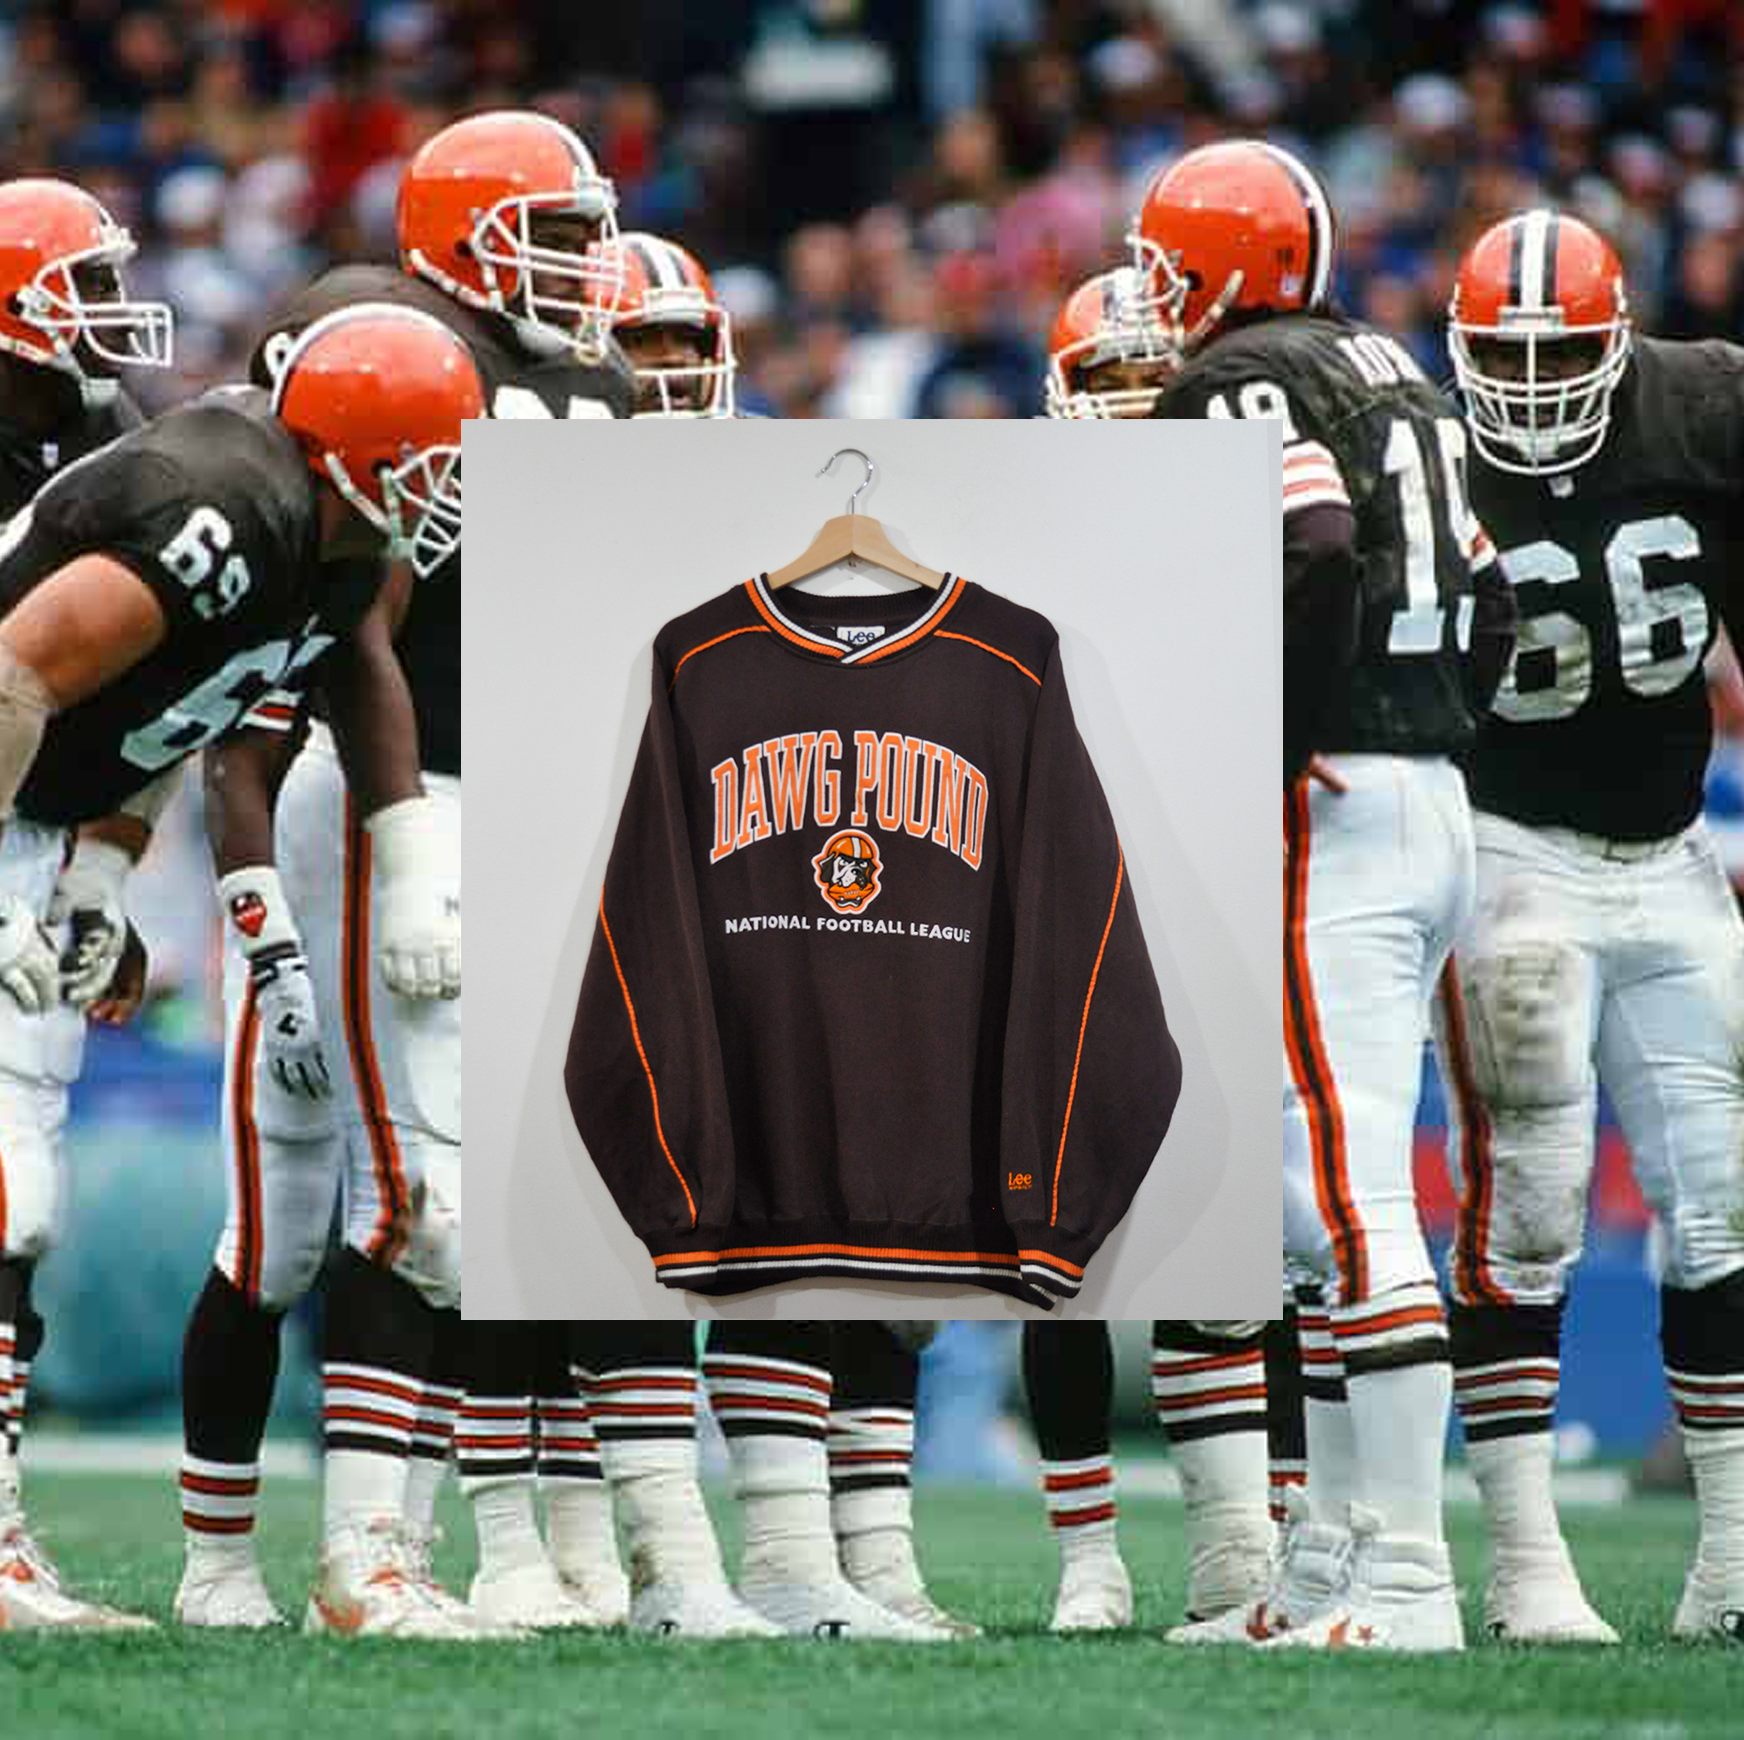 CLEVELAND BROWNS "Dawg Pound" EMBROIDERED CREWNECK